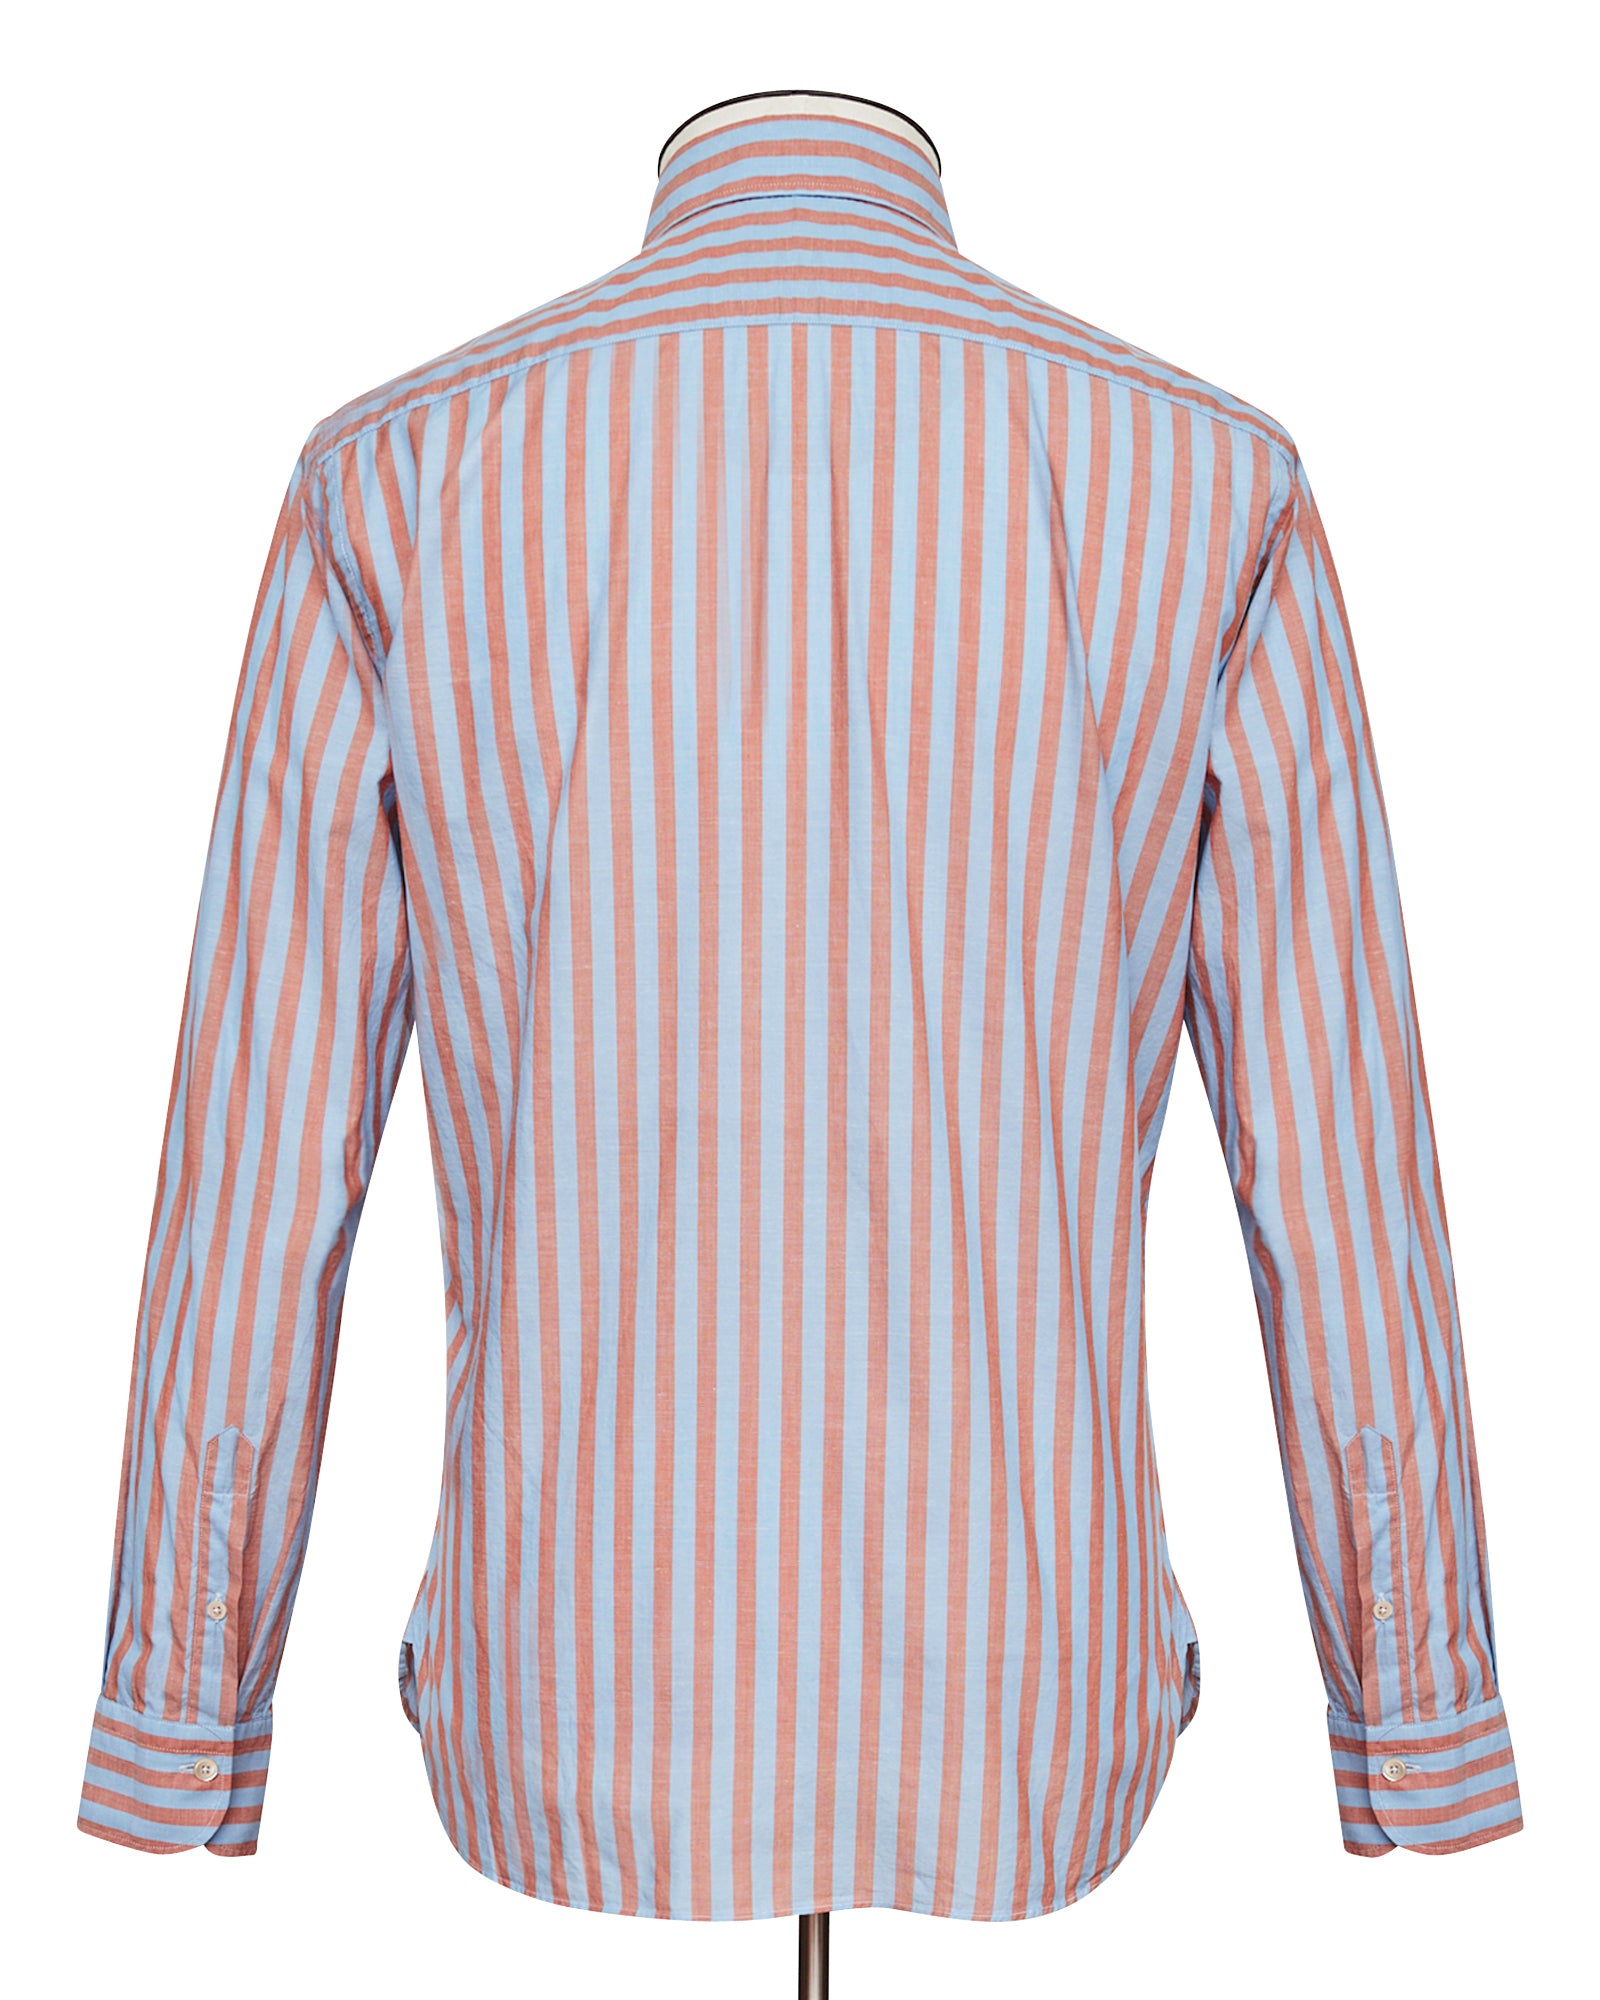 Cerulean Blue and Red Stripe Shirt